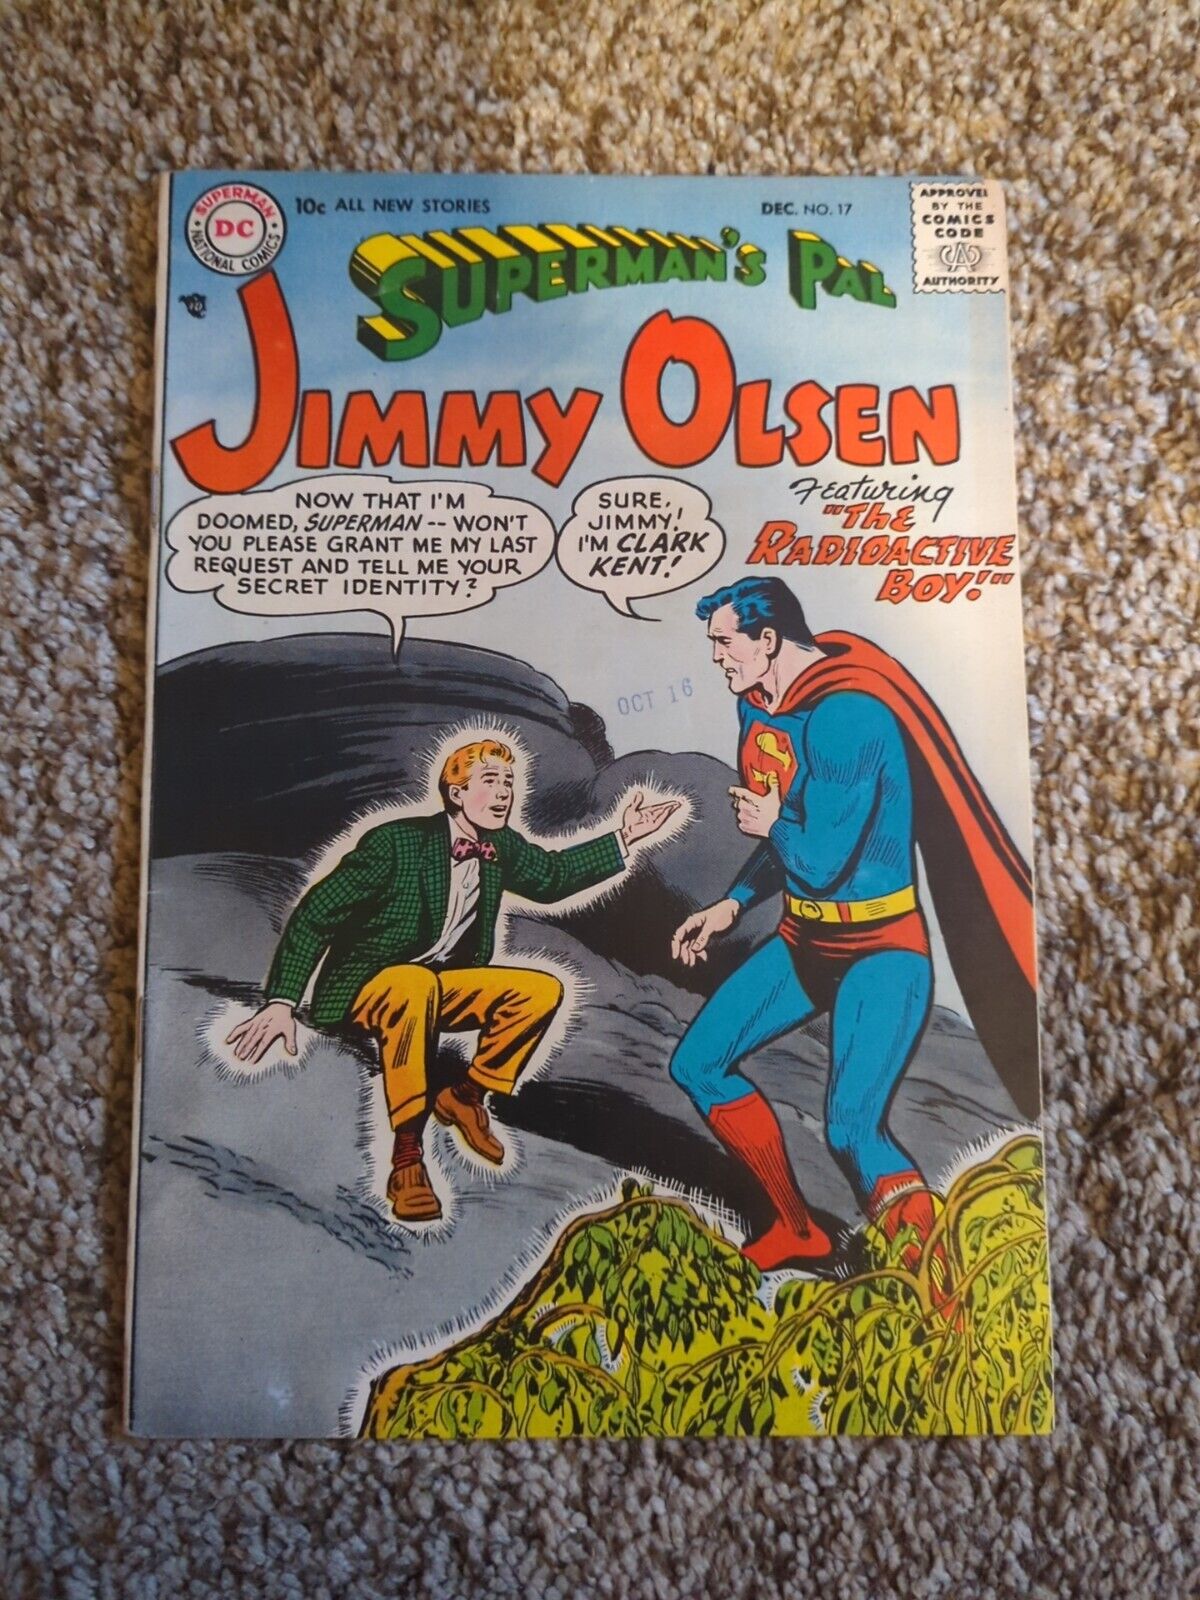 SUPERMAN'S PAL JIMMY OLSEN #17 VG SILVER AGE DC COMIC SEE SCANS NICE CONDITION🔥